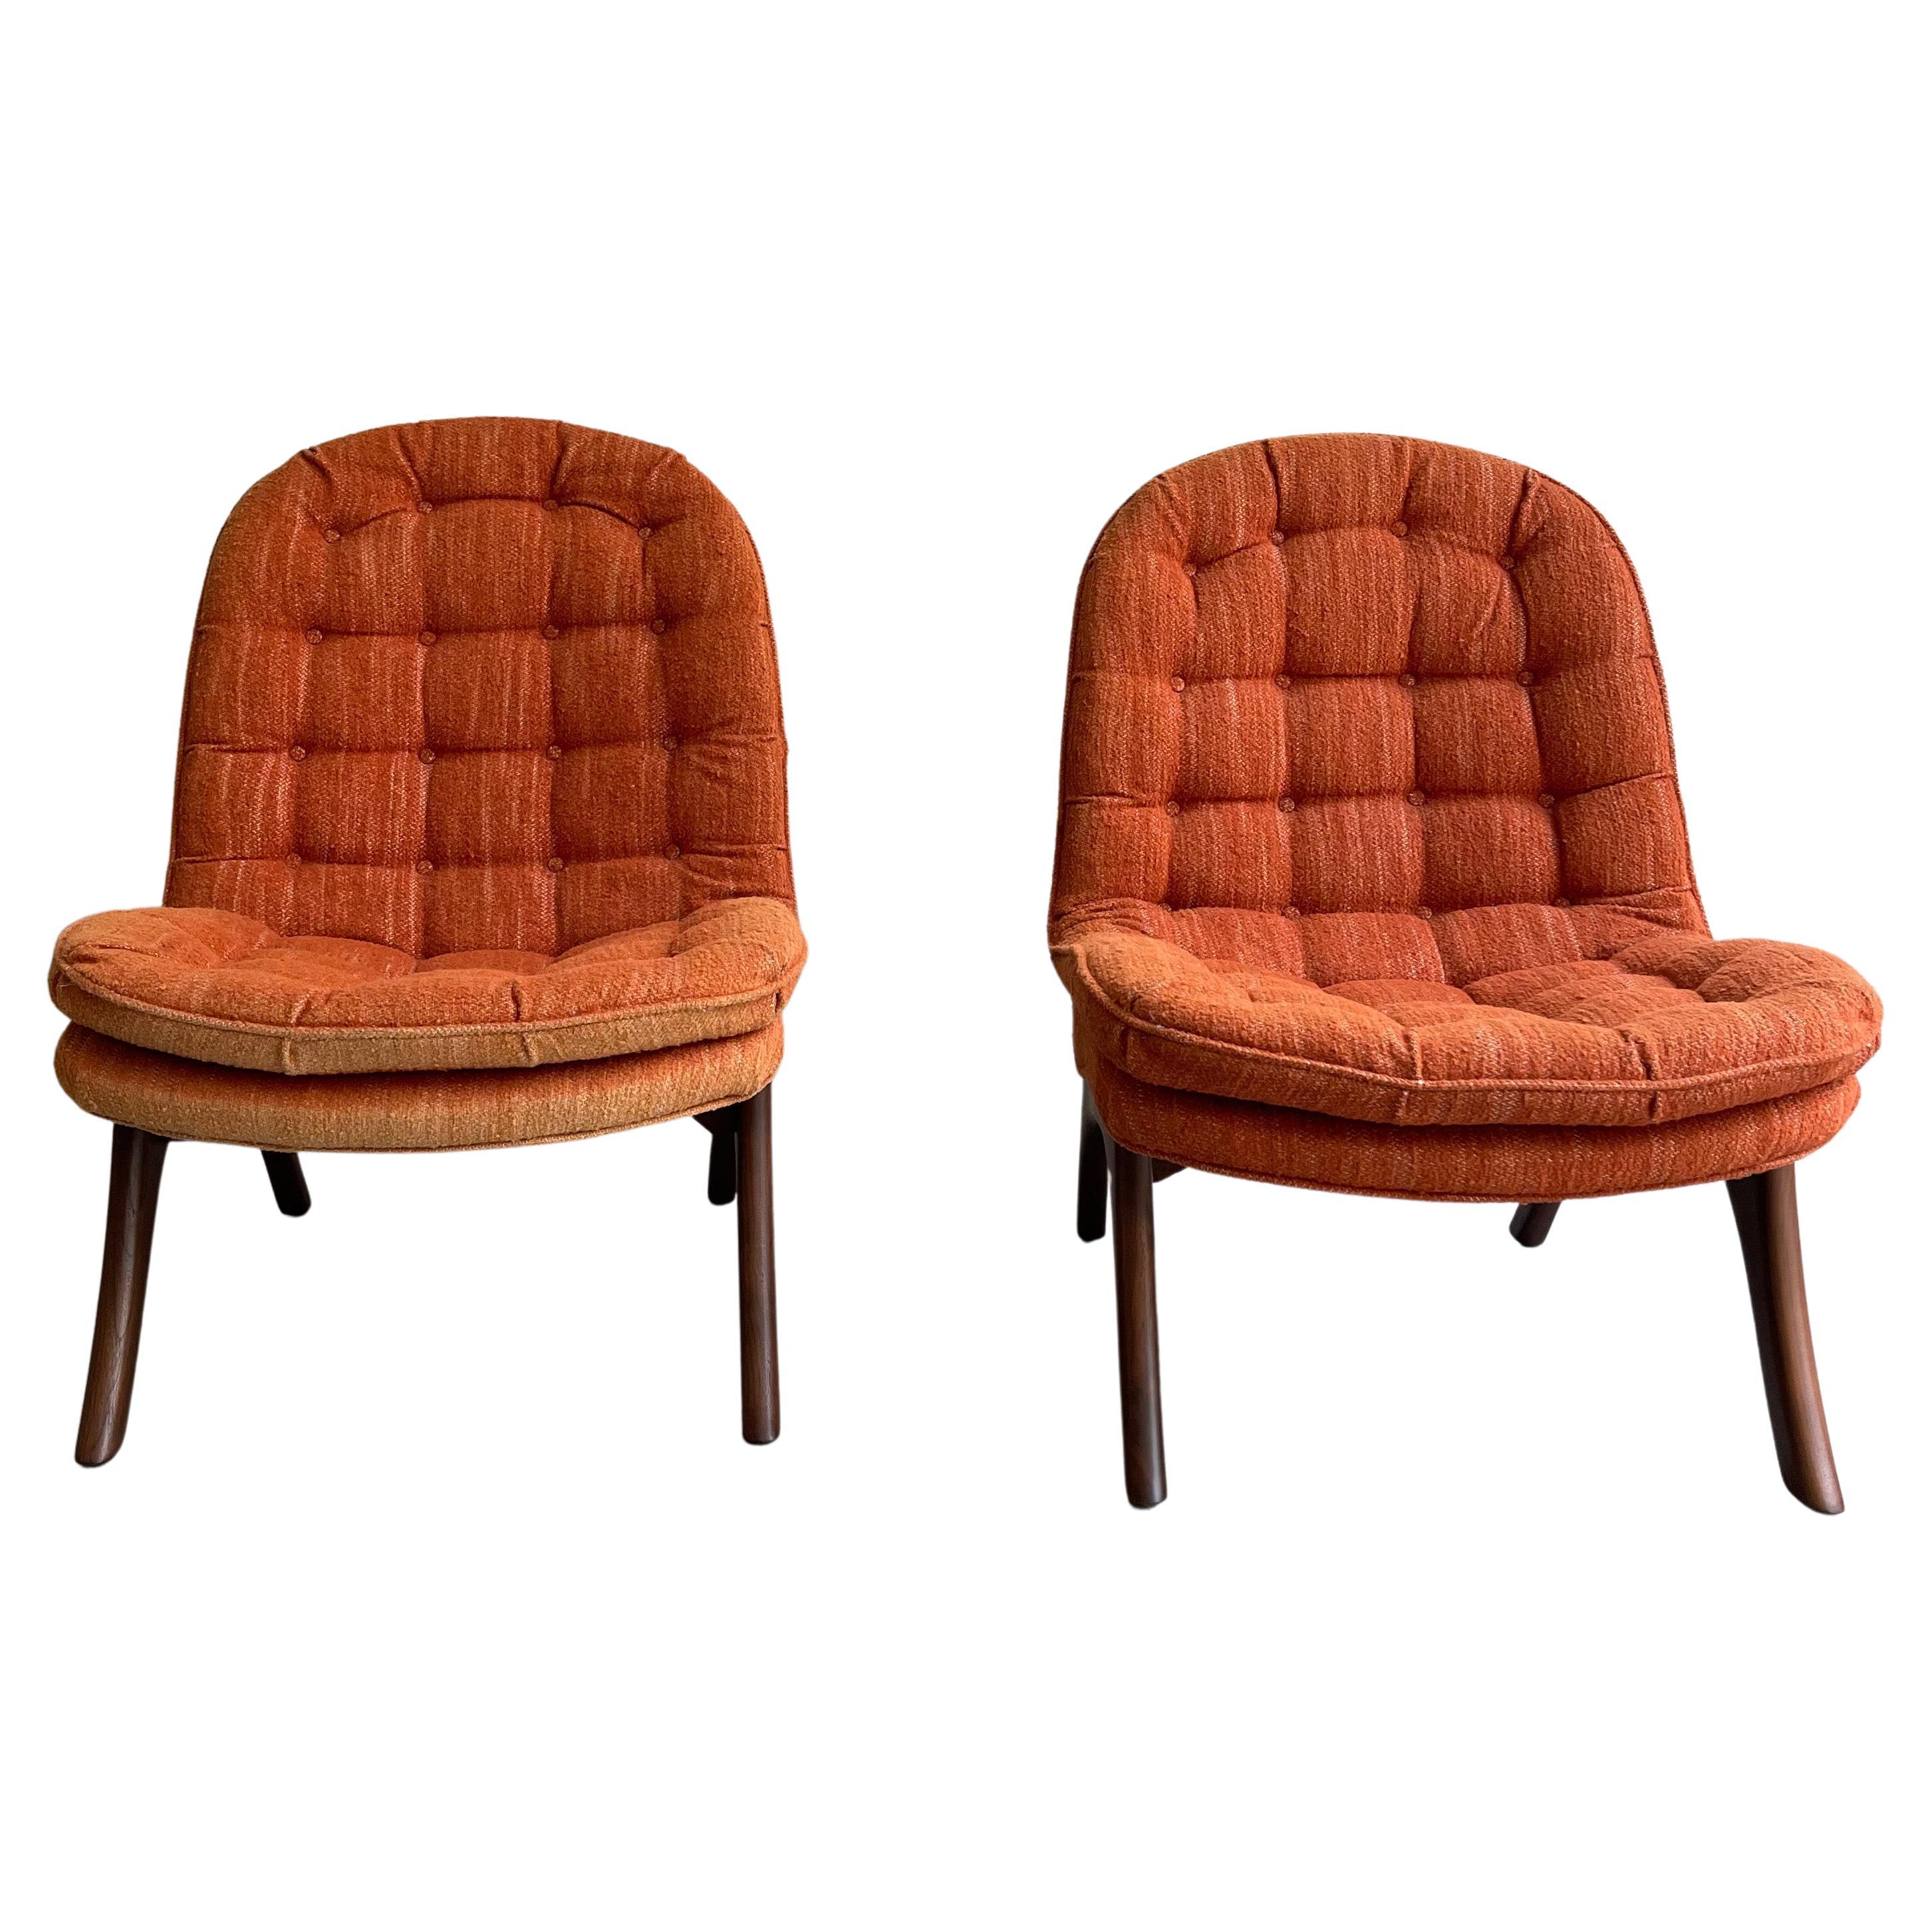 Mid-Century Modern Slipper Chairs By Adrian Pearsall For Craft Associates 5